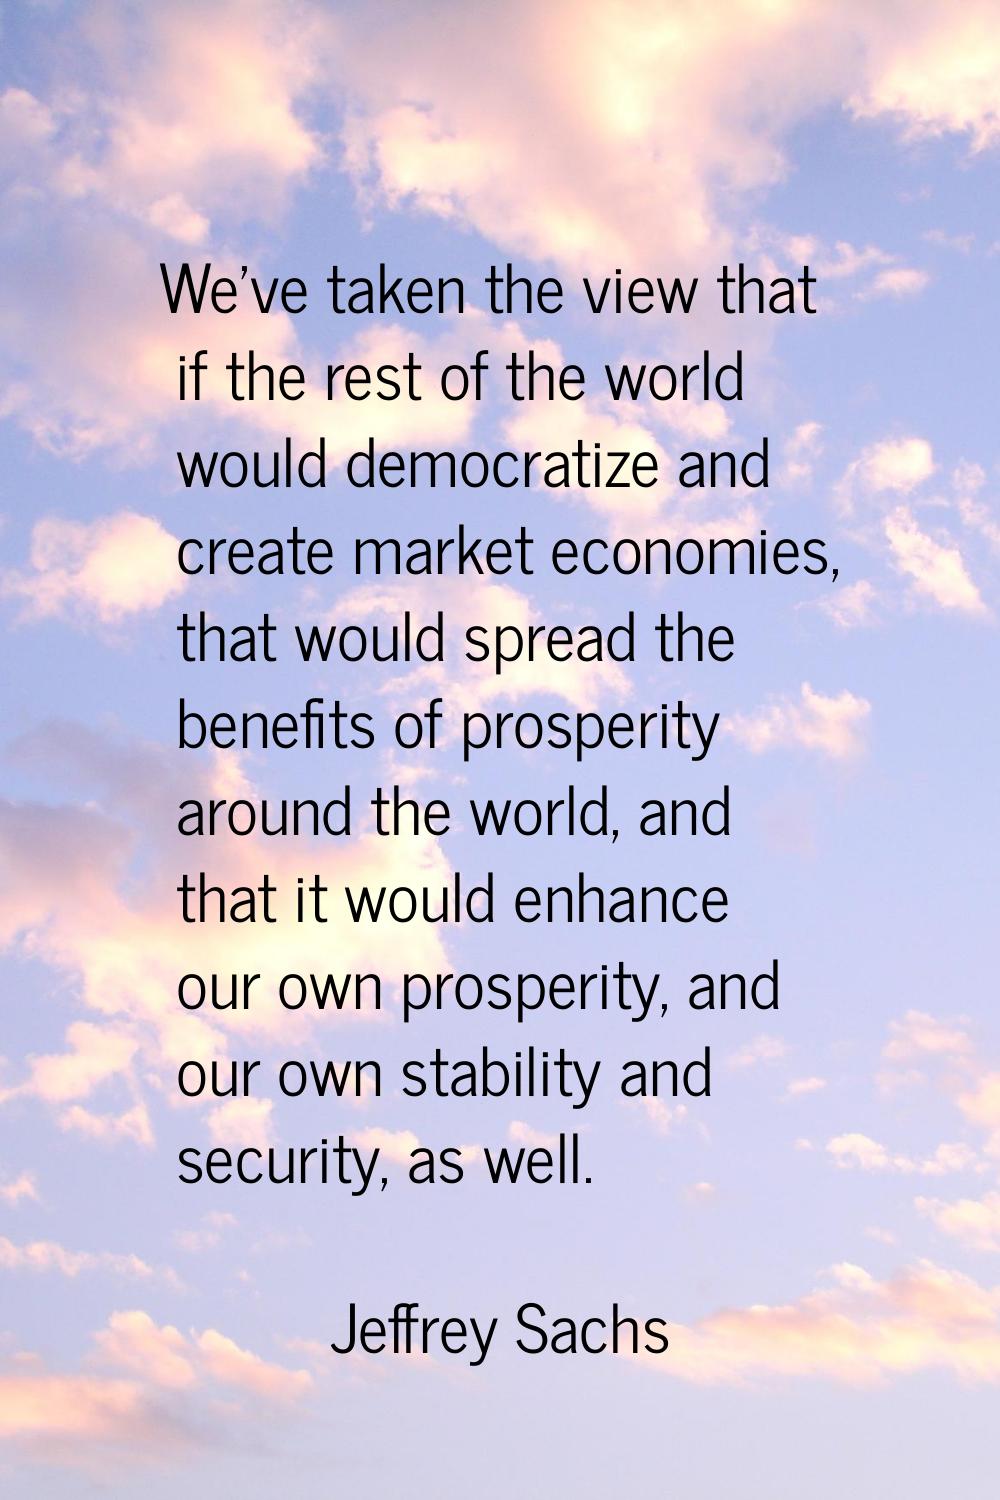 We've taken the view that if the rest of the world would democratize and create market economies, t